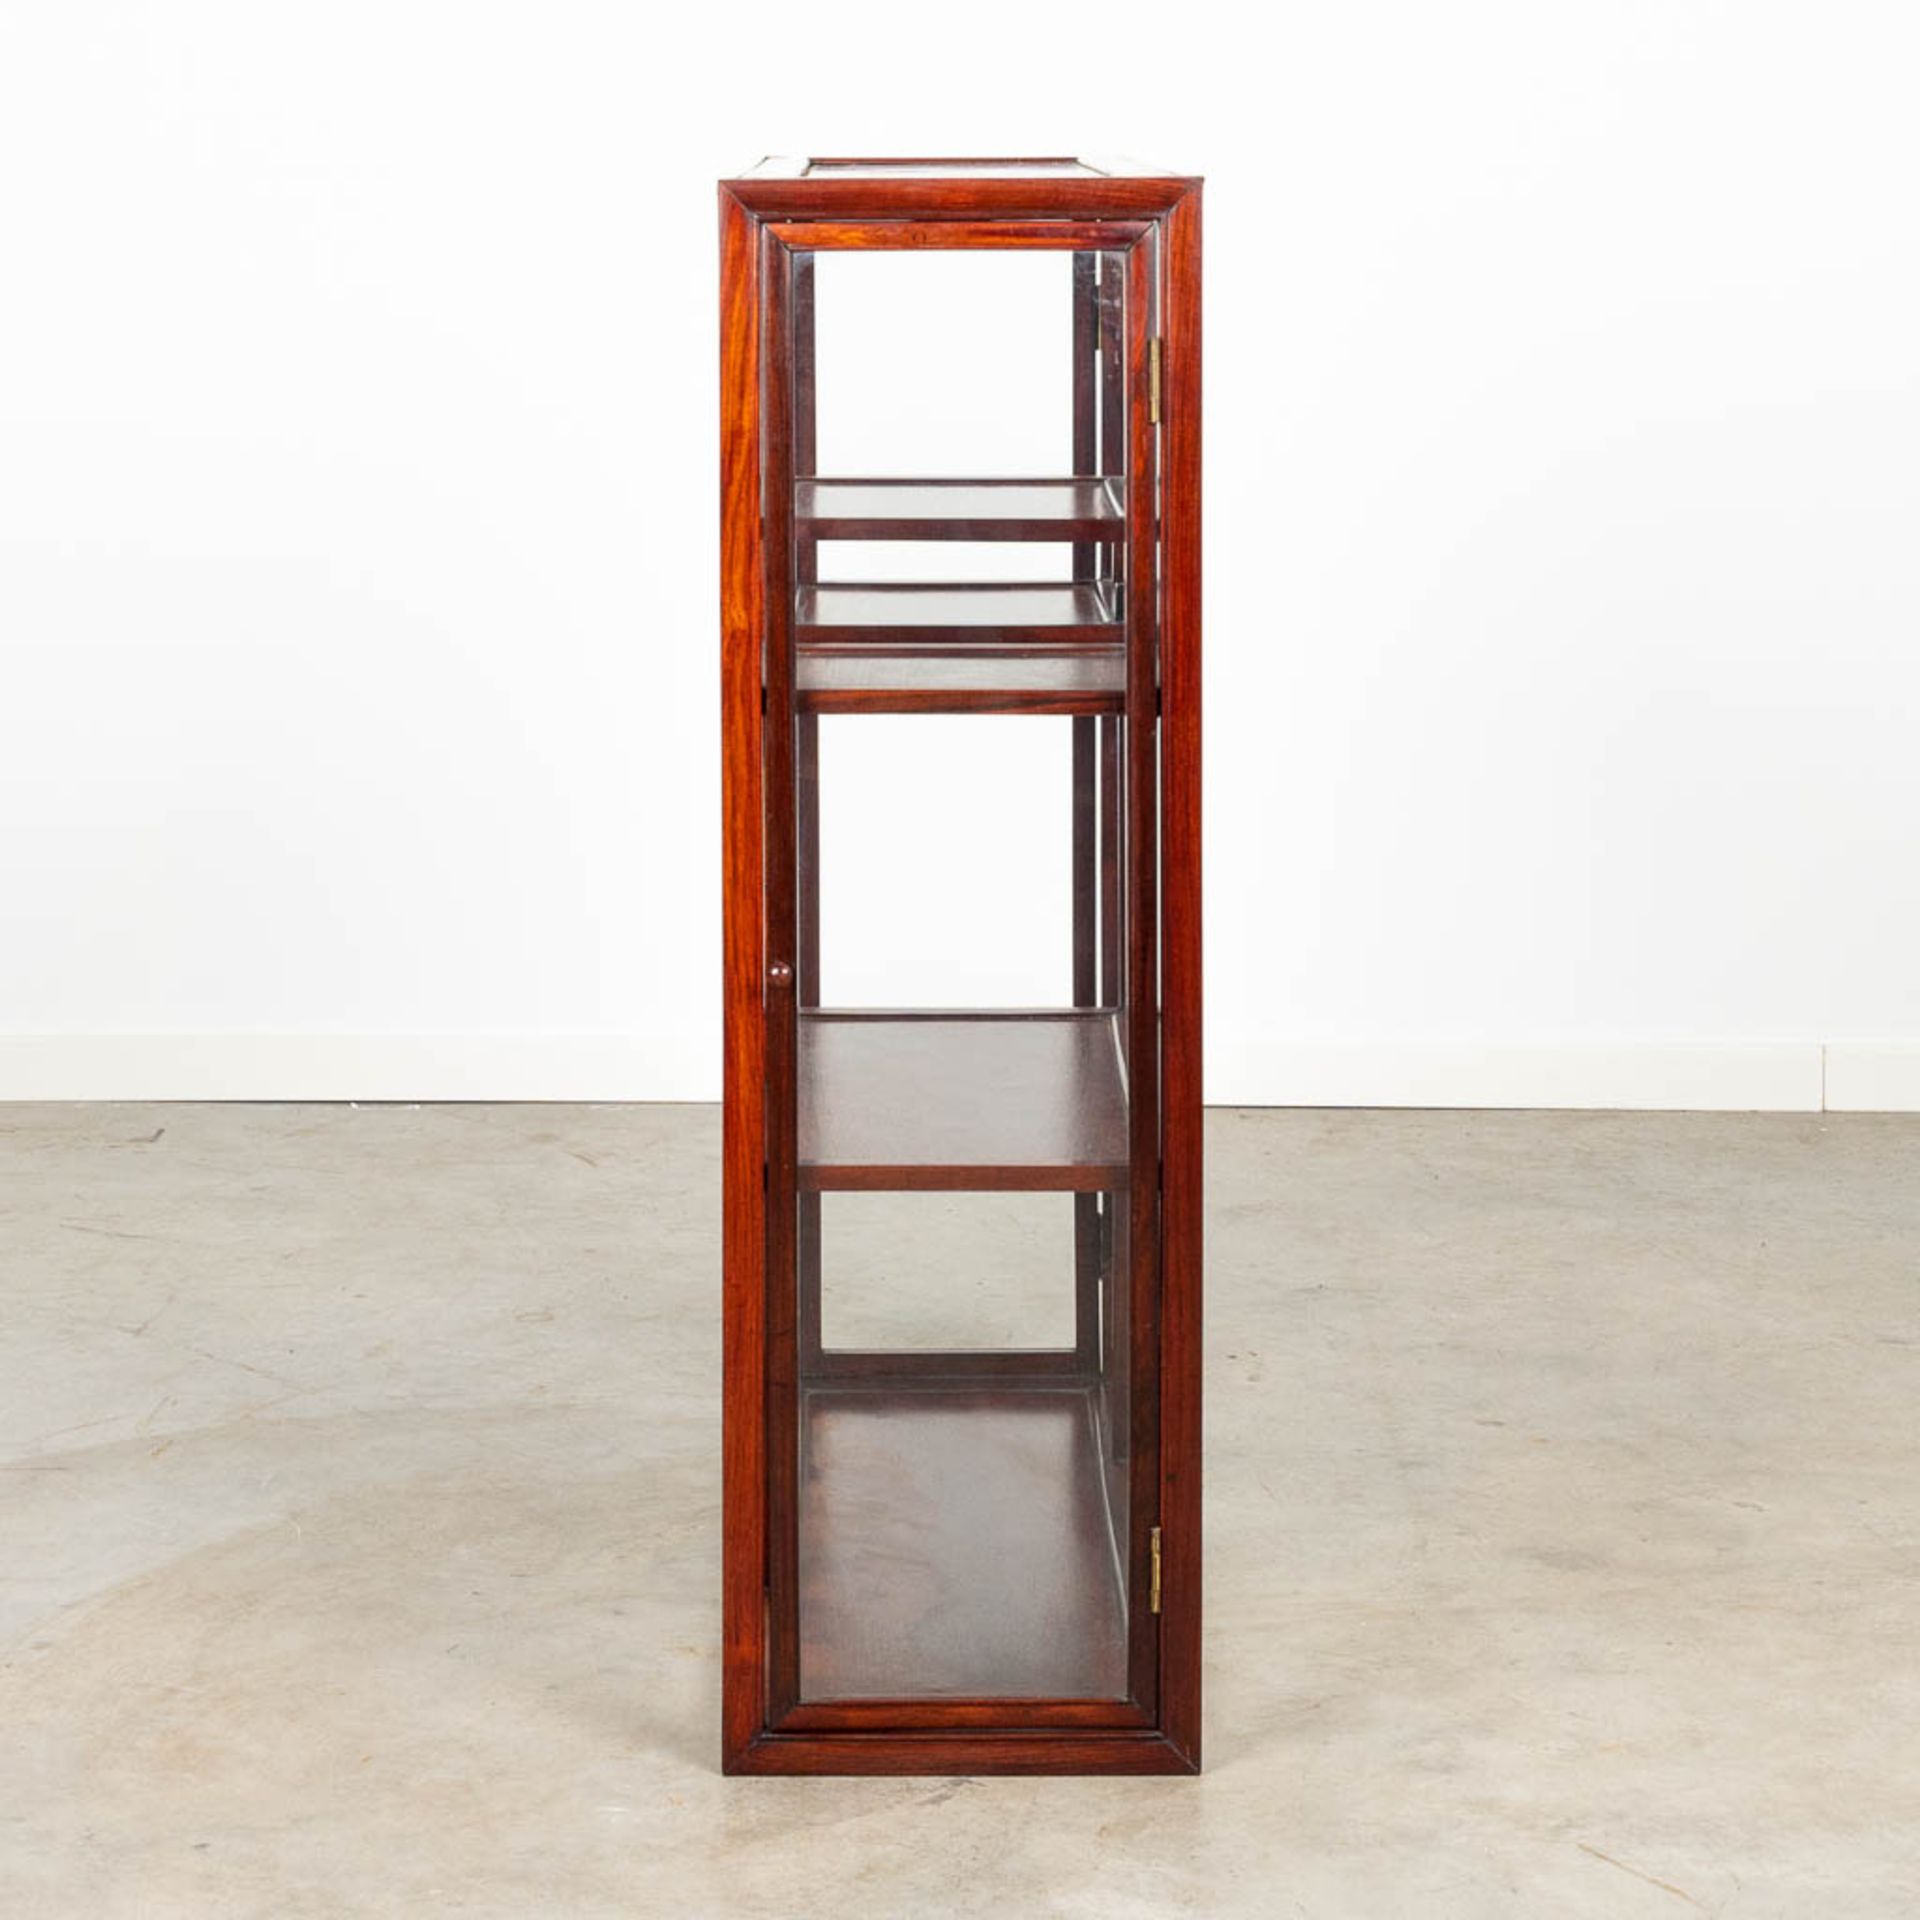 An Oriental display cabinet made of hardwood and glass. - Image 2 of 5